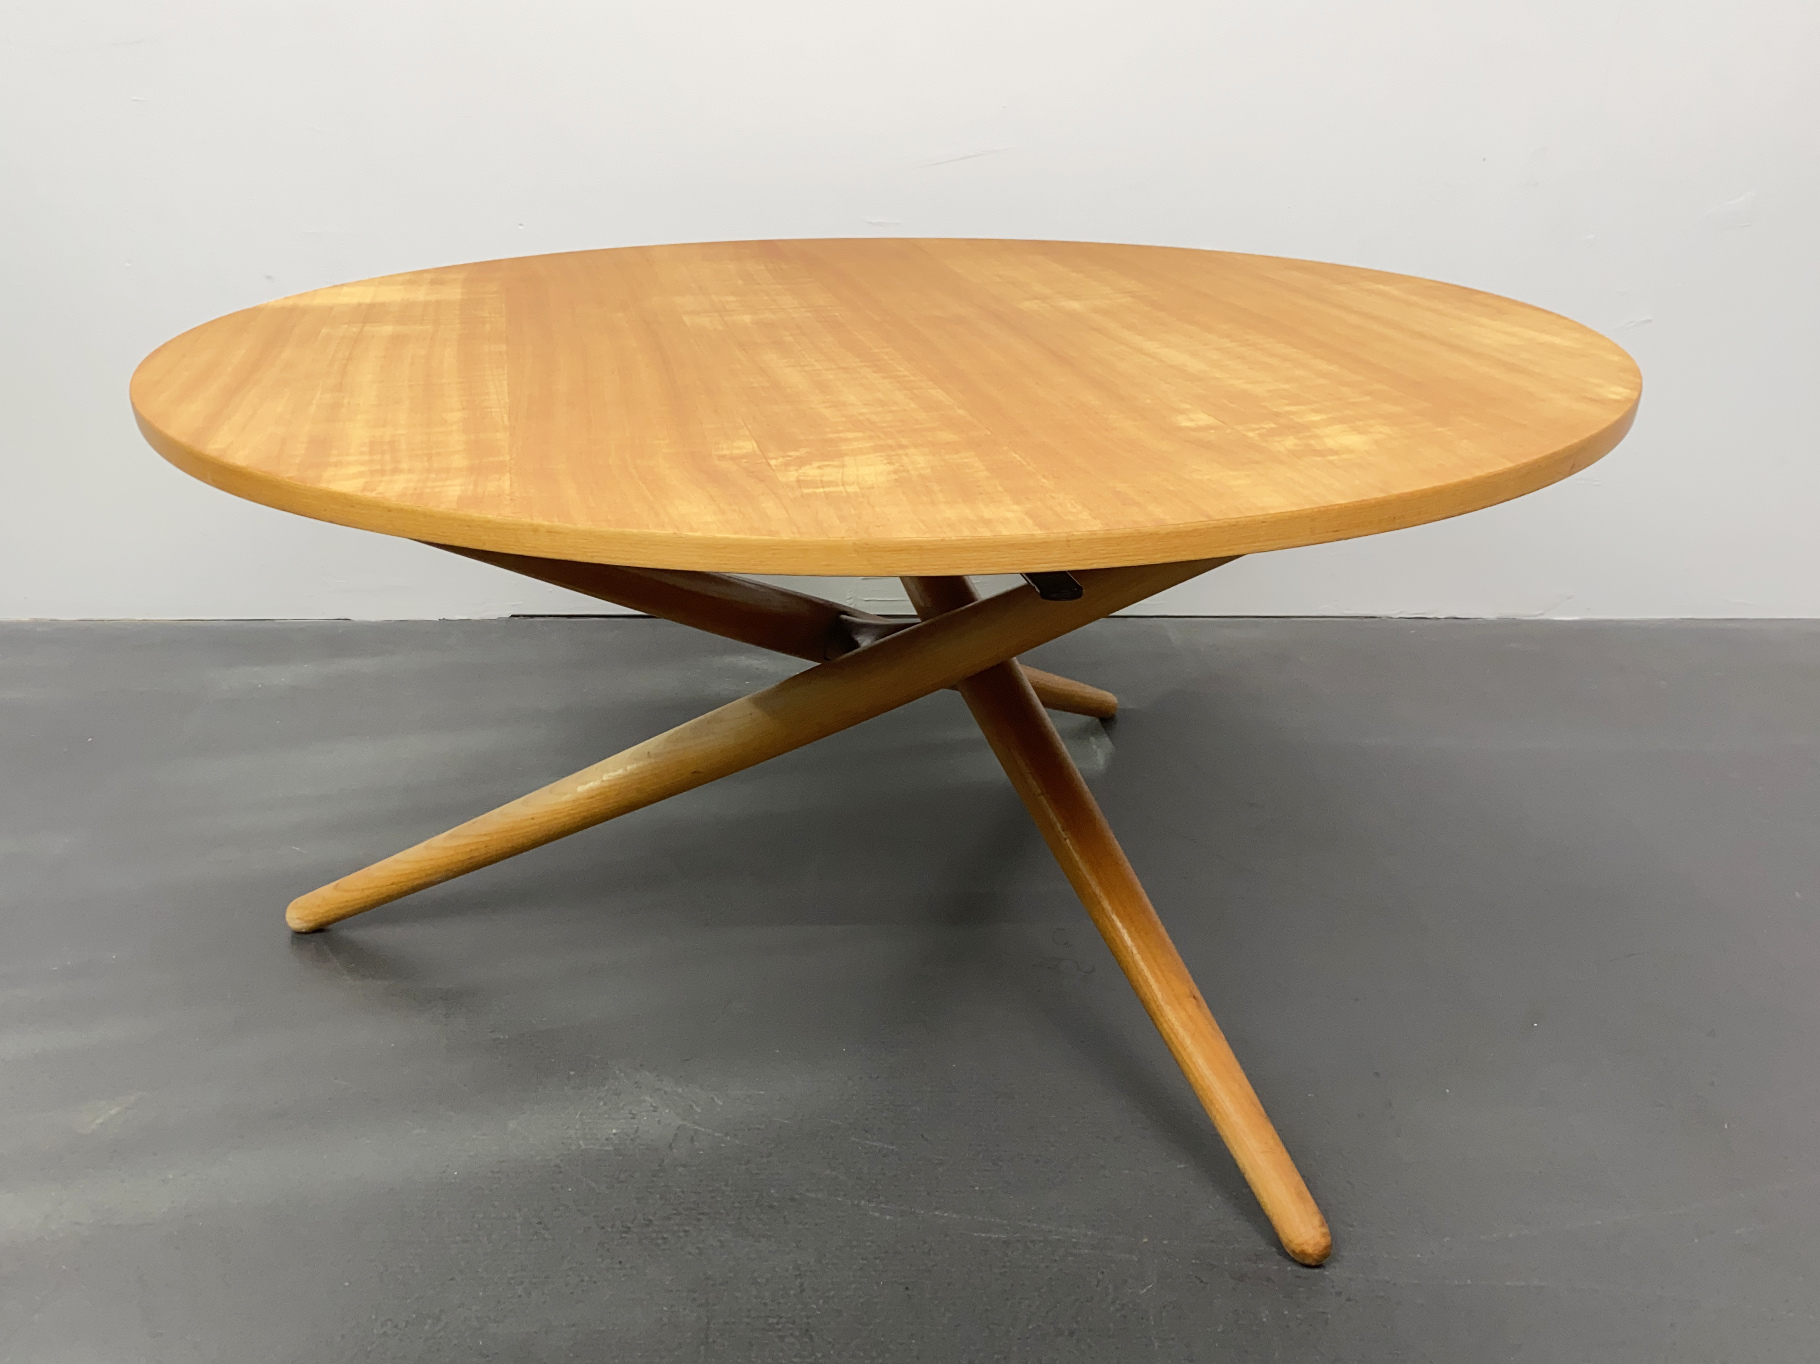 Coffee Table, Dining Table, height adjustable, Cherry Wood, by Jürg Bally, for Wohnhilfe, Switzerland, 1950s